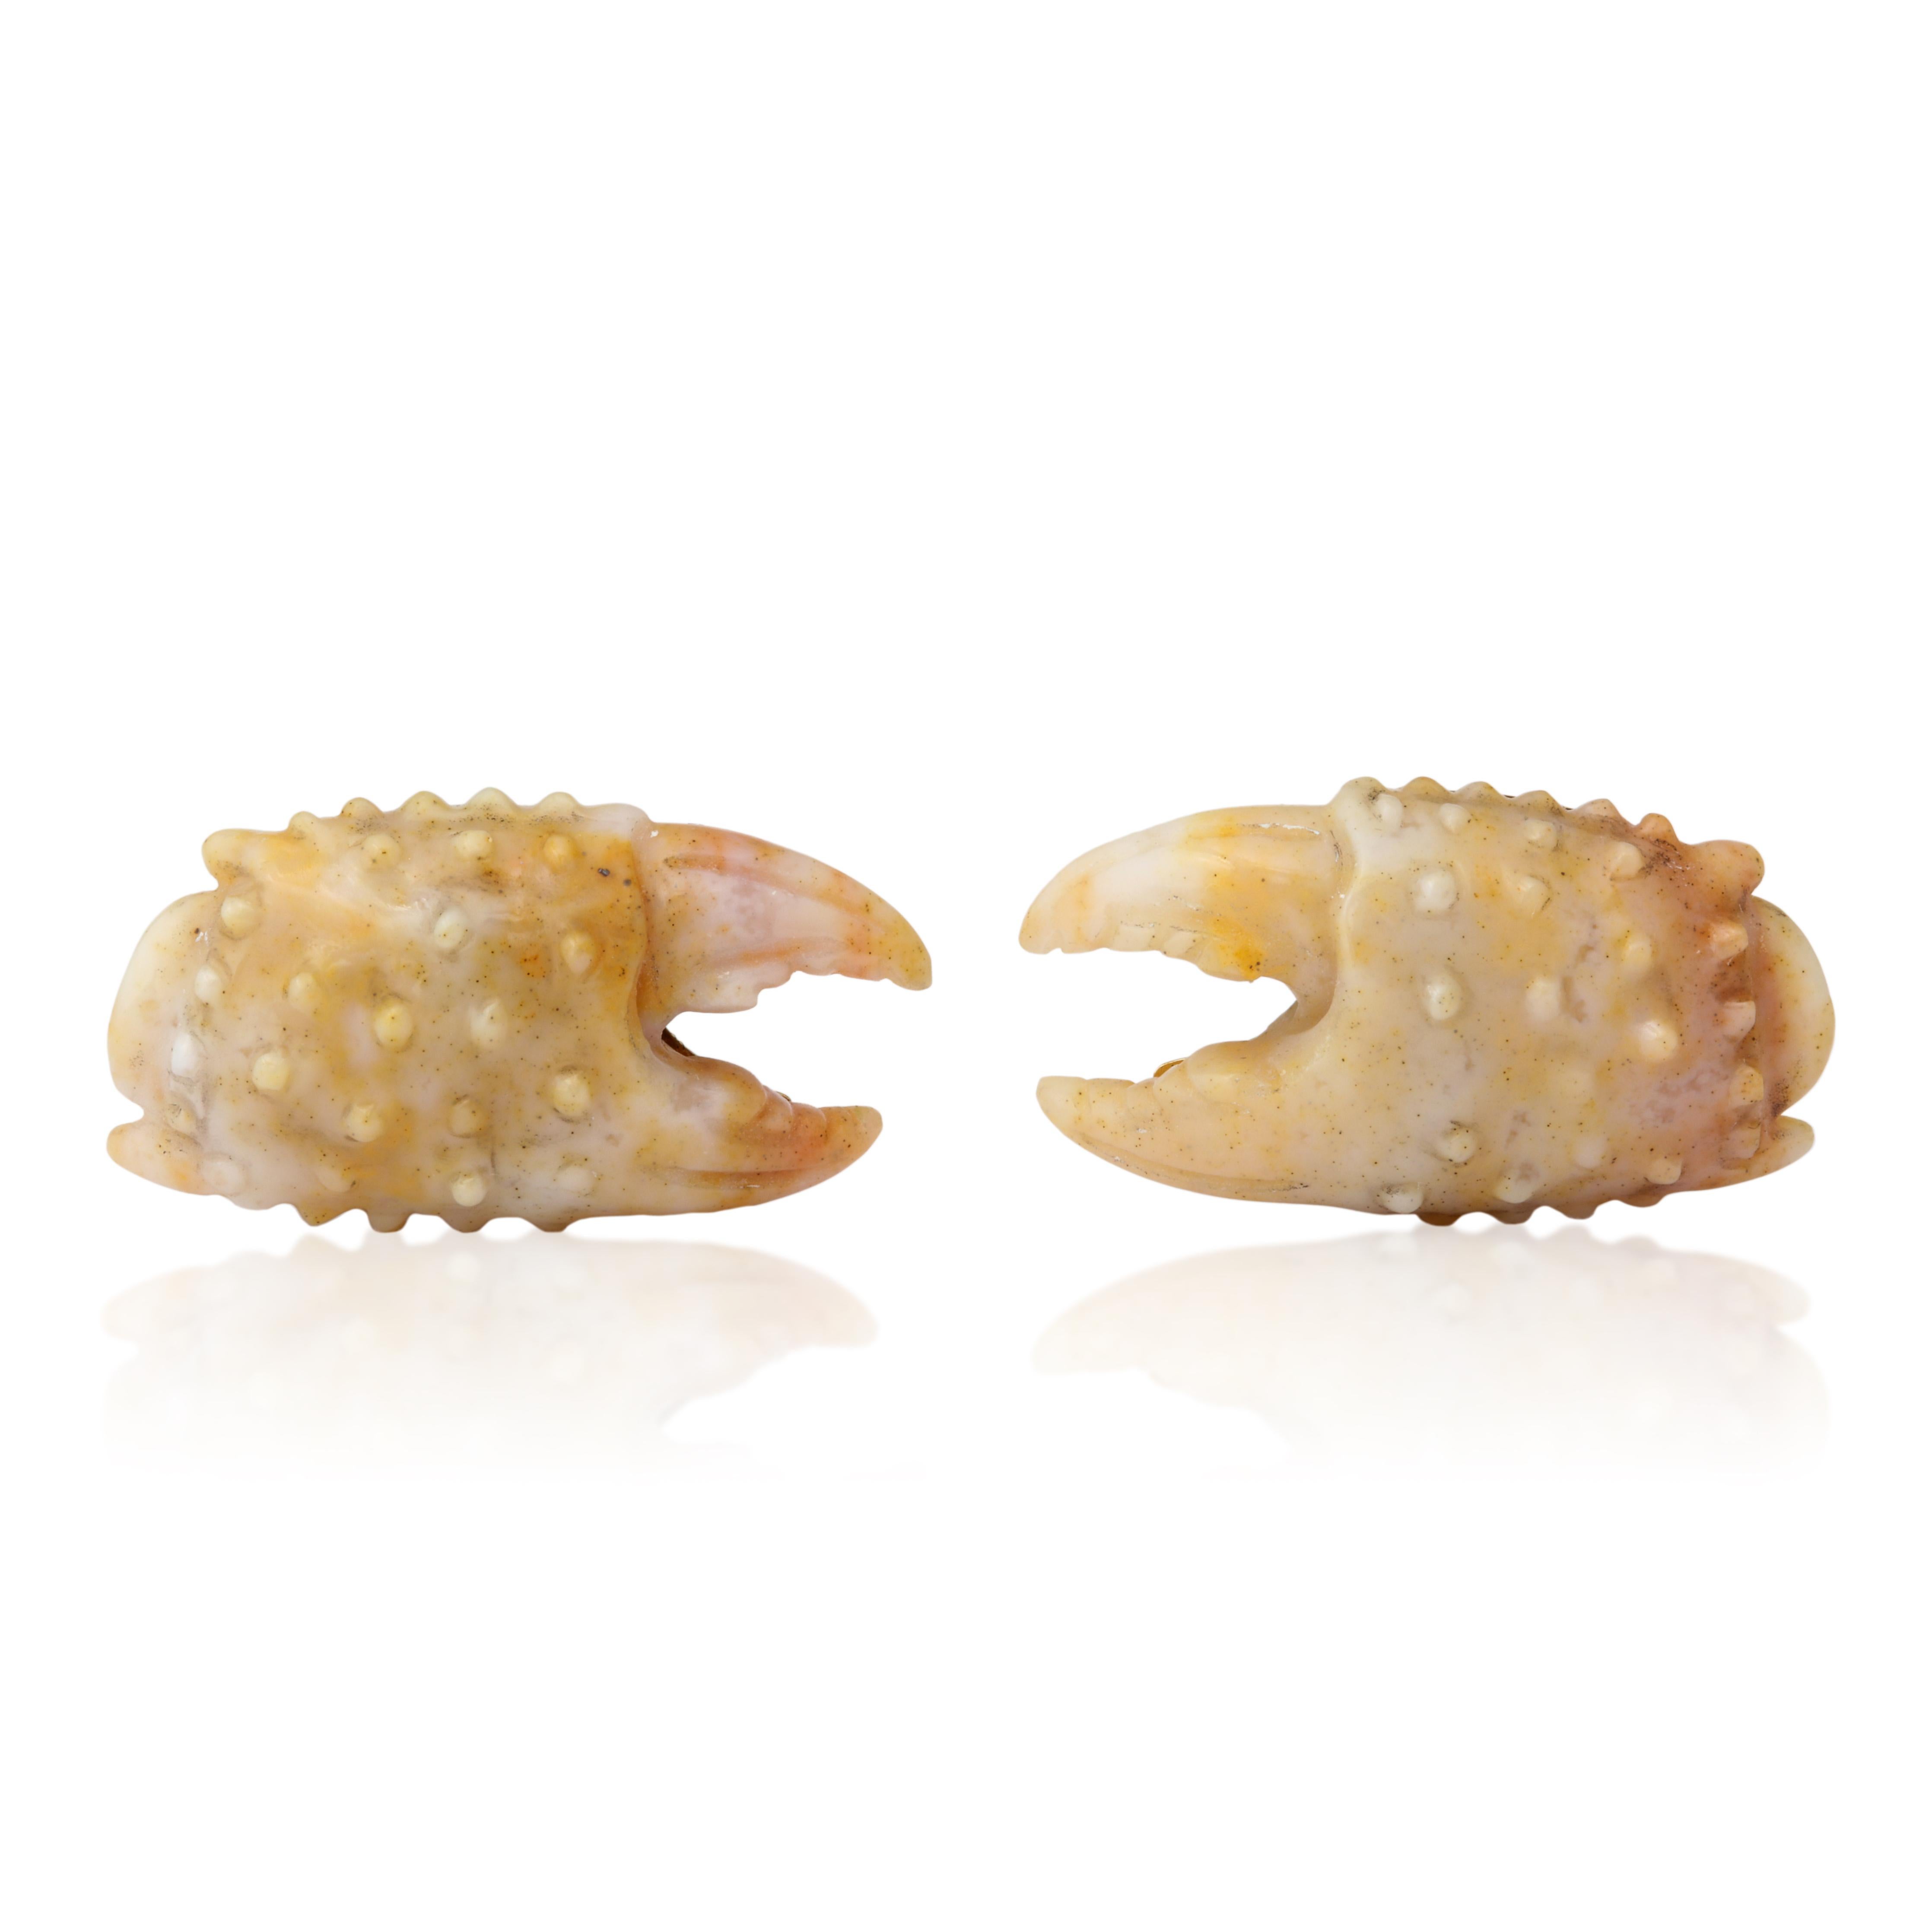 While you can only enjoy the seasonal delicacy of stone crab claws from October through May, these wonderful cufflinks can be worn all year long.  They are realistically carved from a rare type of chalcedony found in Madagascar, and expertly mounted